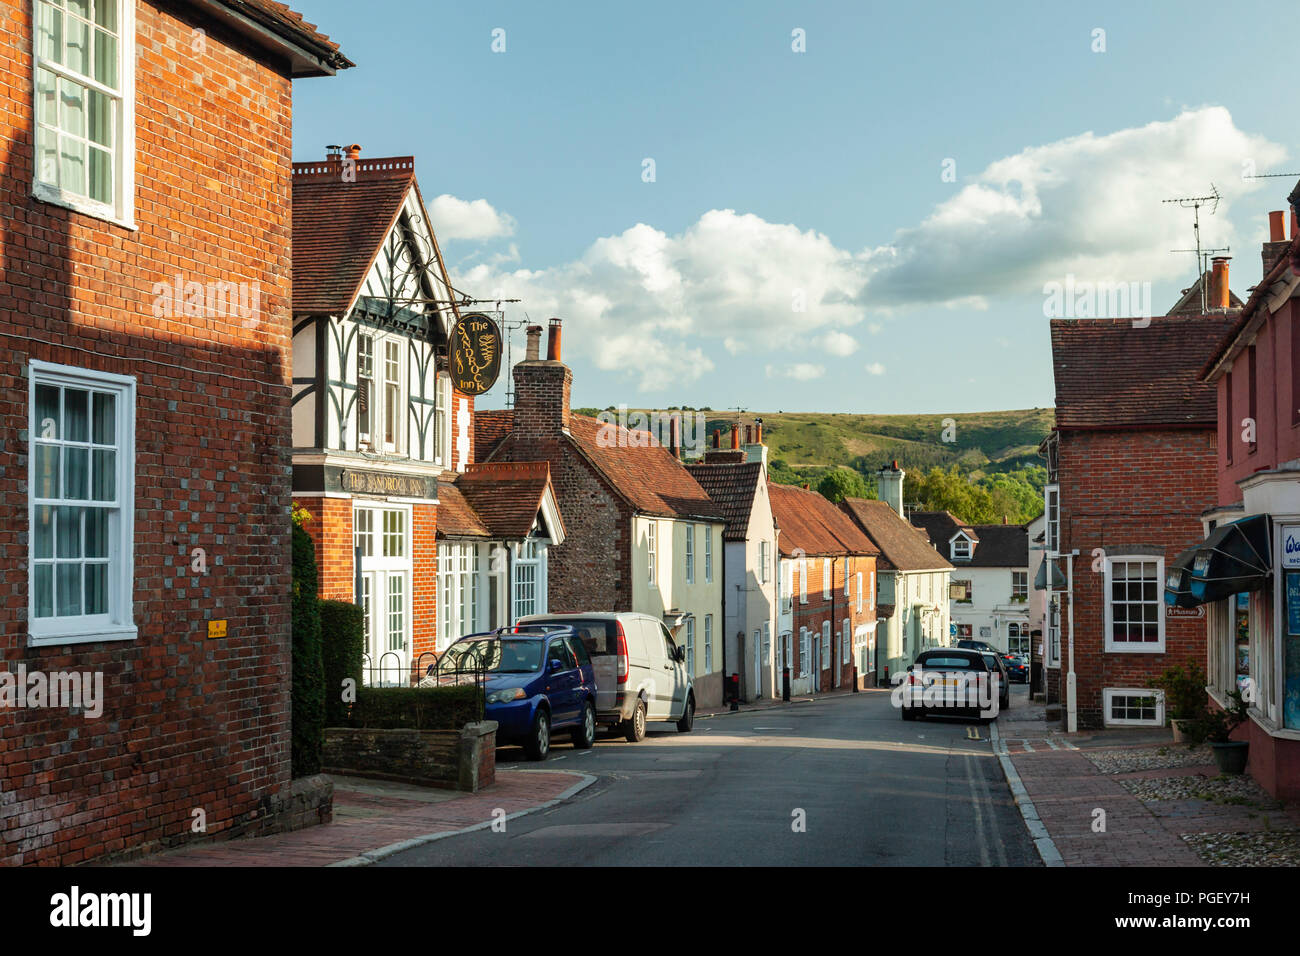 Summer evening in Ditchling village, East Sussex, England. Stock Photo